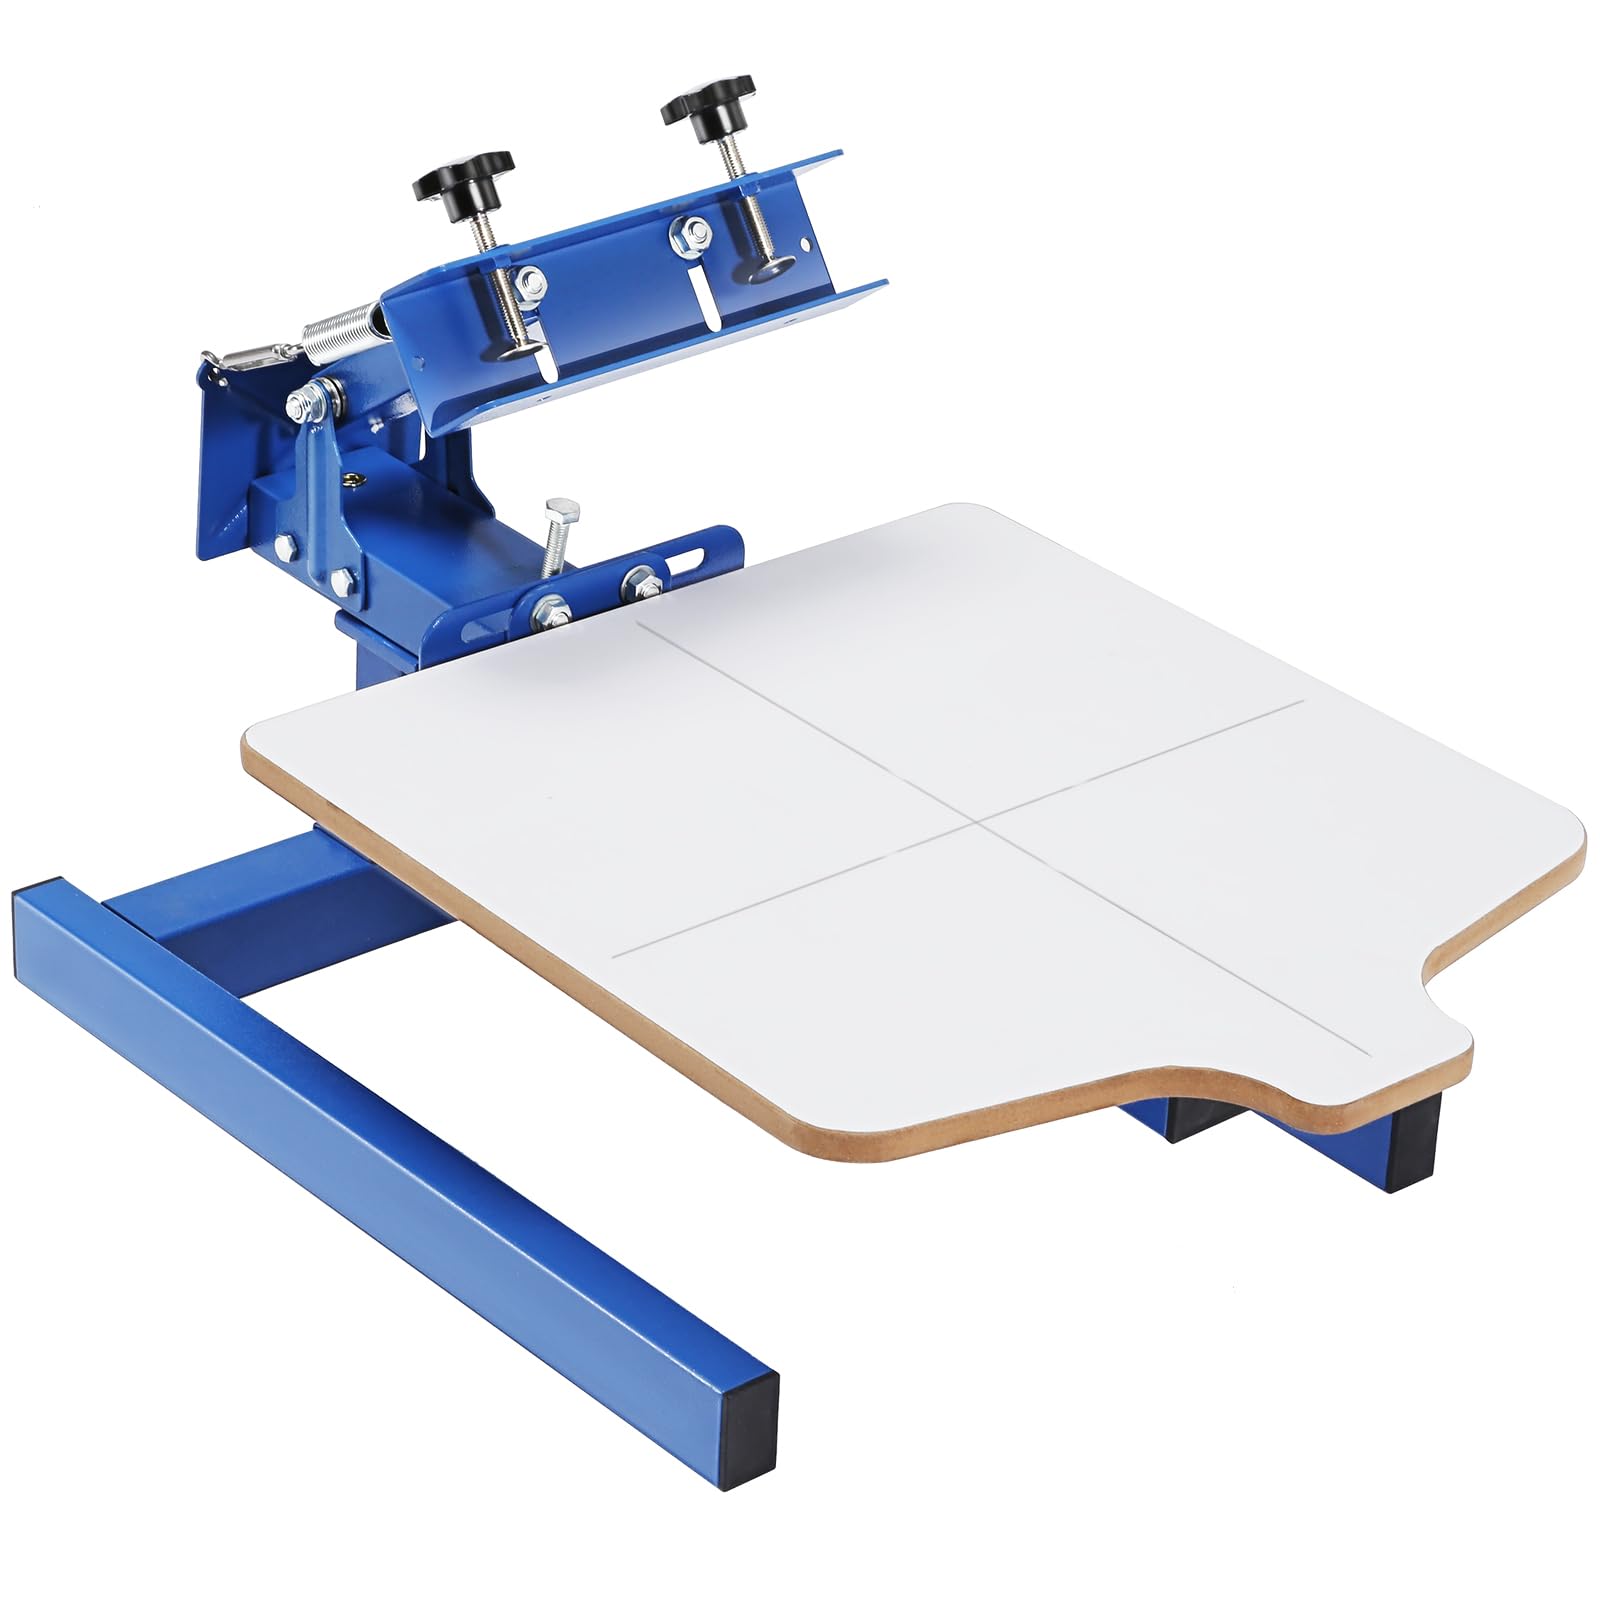 VEVOR Screen Printing Machine, 1 Color 1 Station Silk Screen Printing Press, 21.2x17.7in Screen Printing Press, Double-Layer Positioning Pallet, Adjustable Tension for T-Shirt DIY Printing